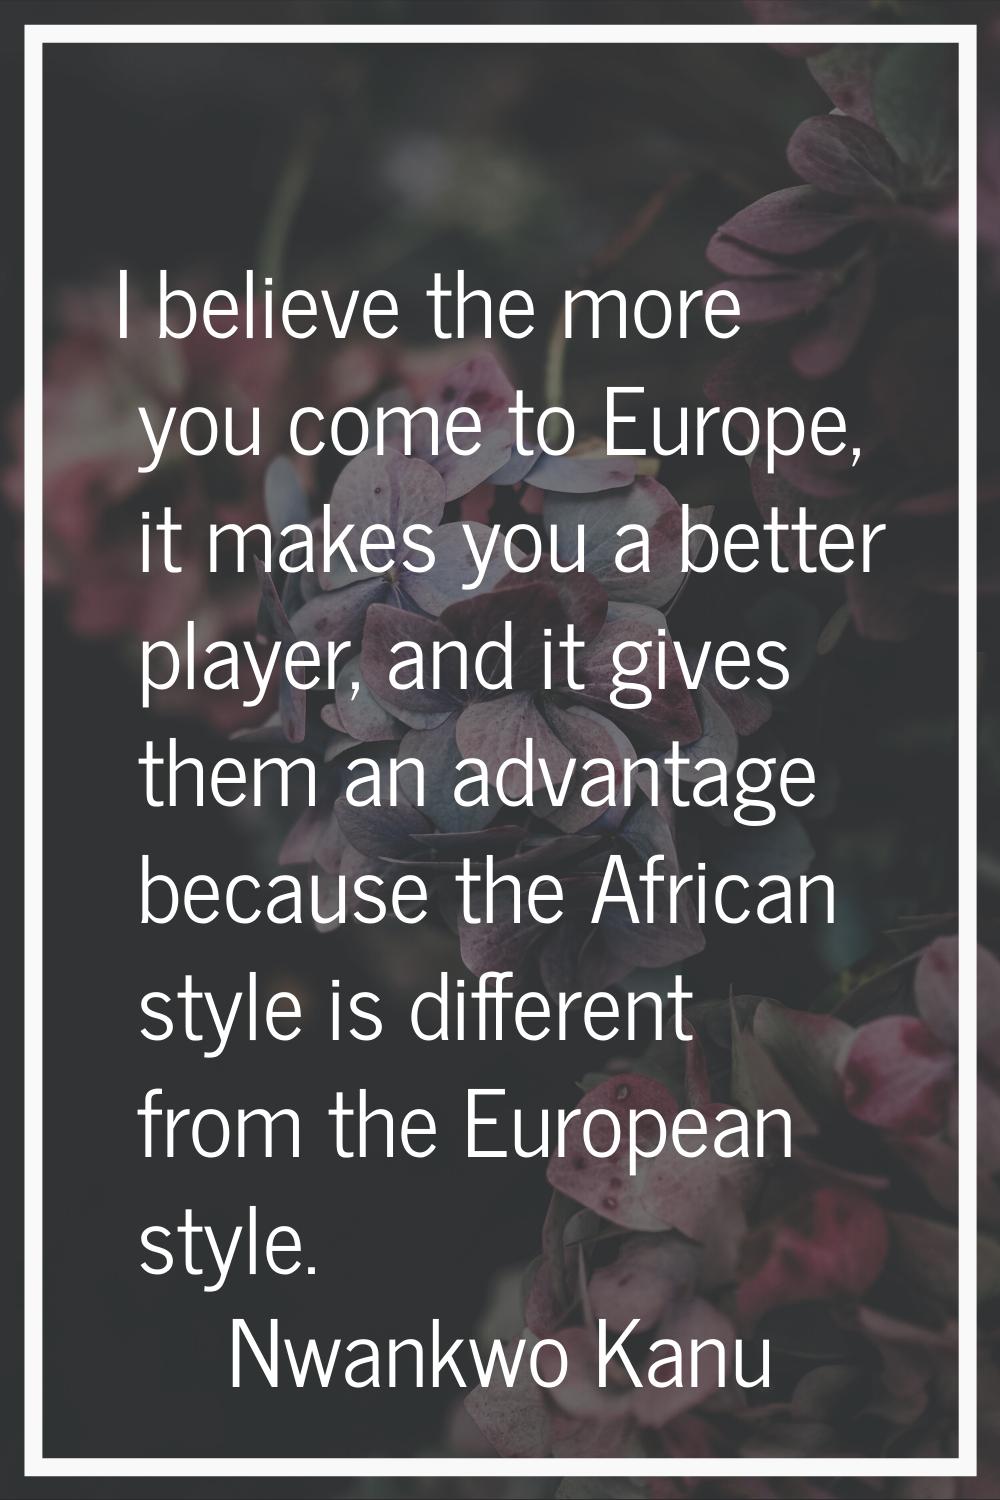 I believe the more you come to Europe, it makes you a better player, and it gives them an advantage